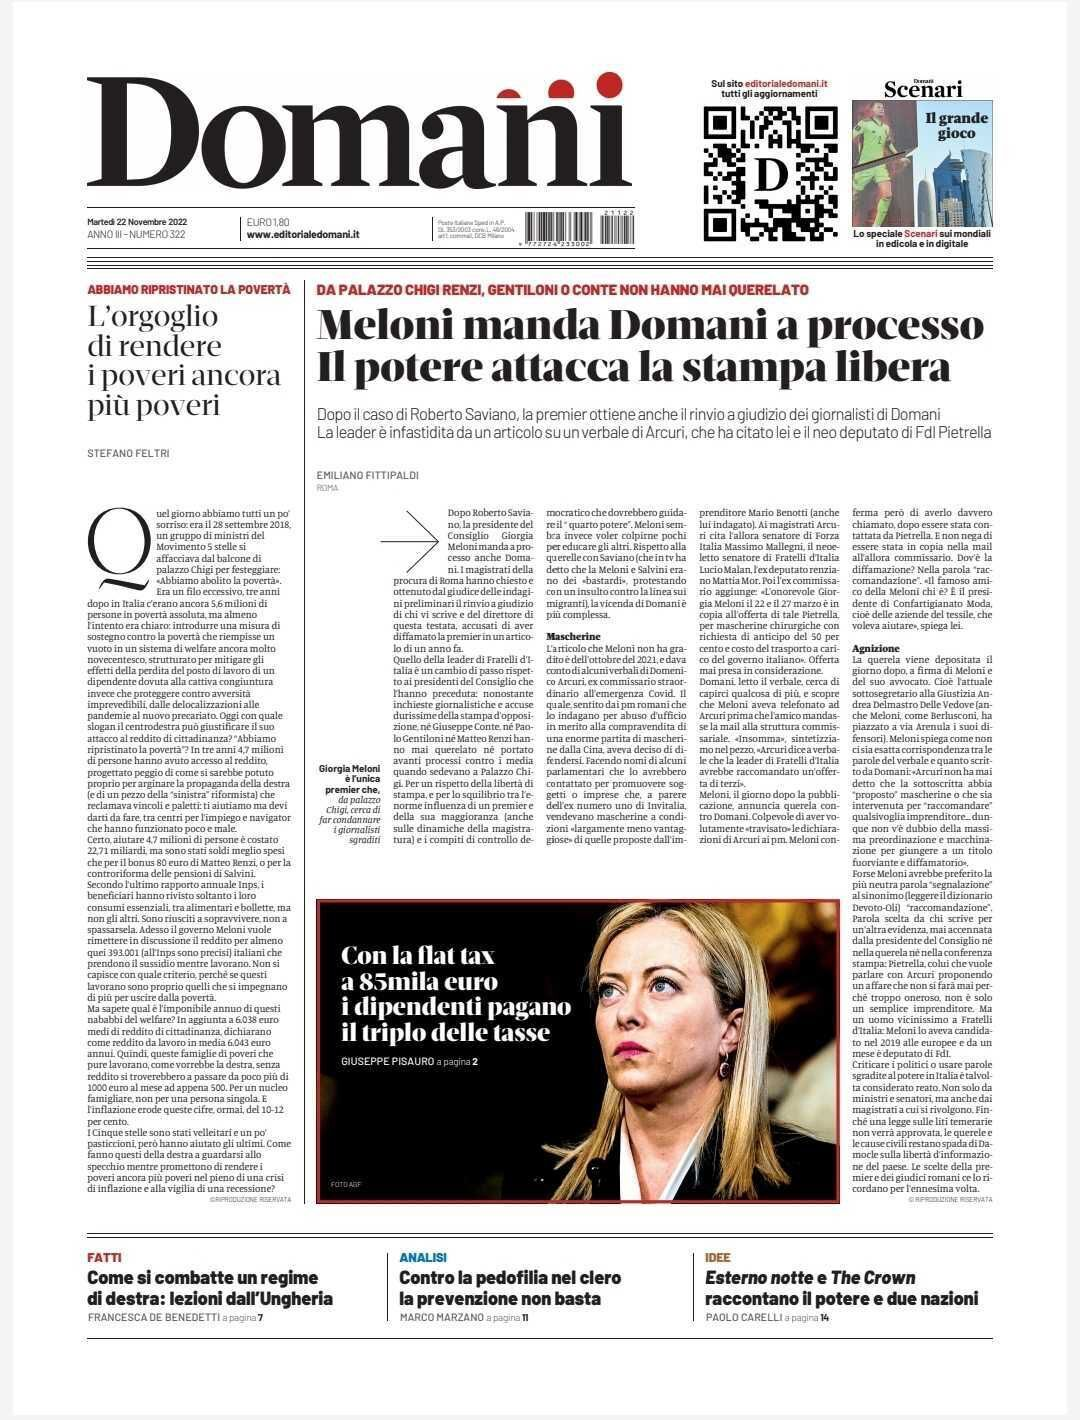 Italy: PM Meloni urged to drop defamation lawsuit against newspaper Domani